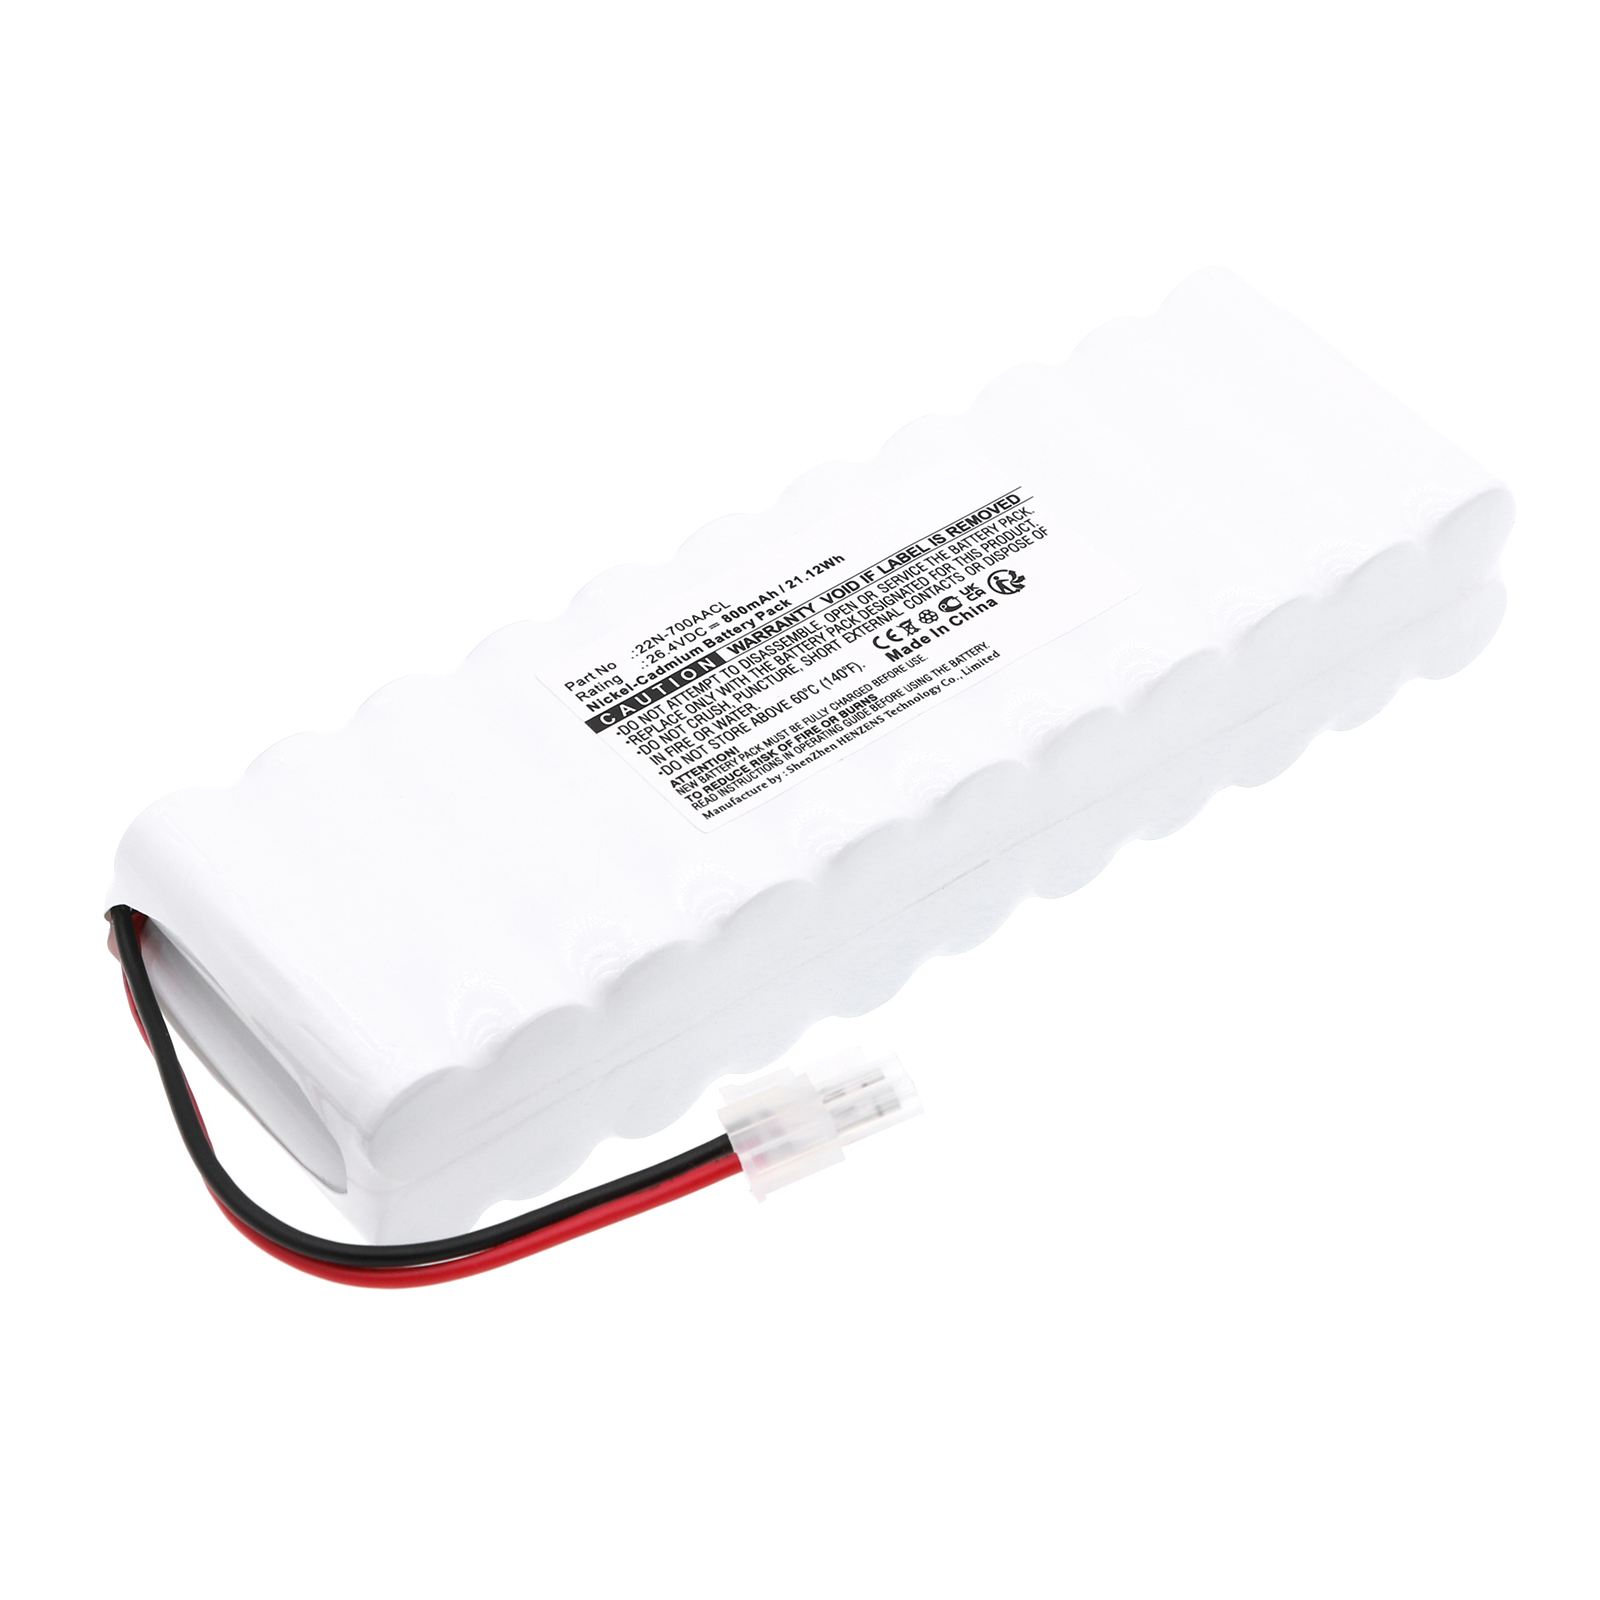 Synergy Digital PLC Battery, Compatible with Epson 22N-700AACL PLC Battery (Ni-CD, 26.4V, 800mAh)